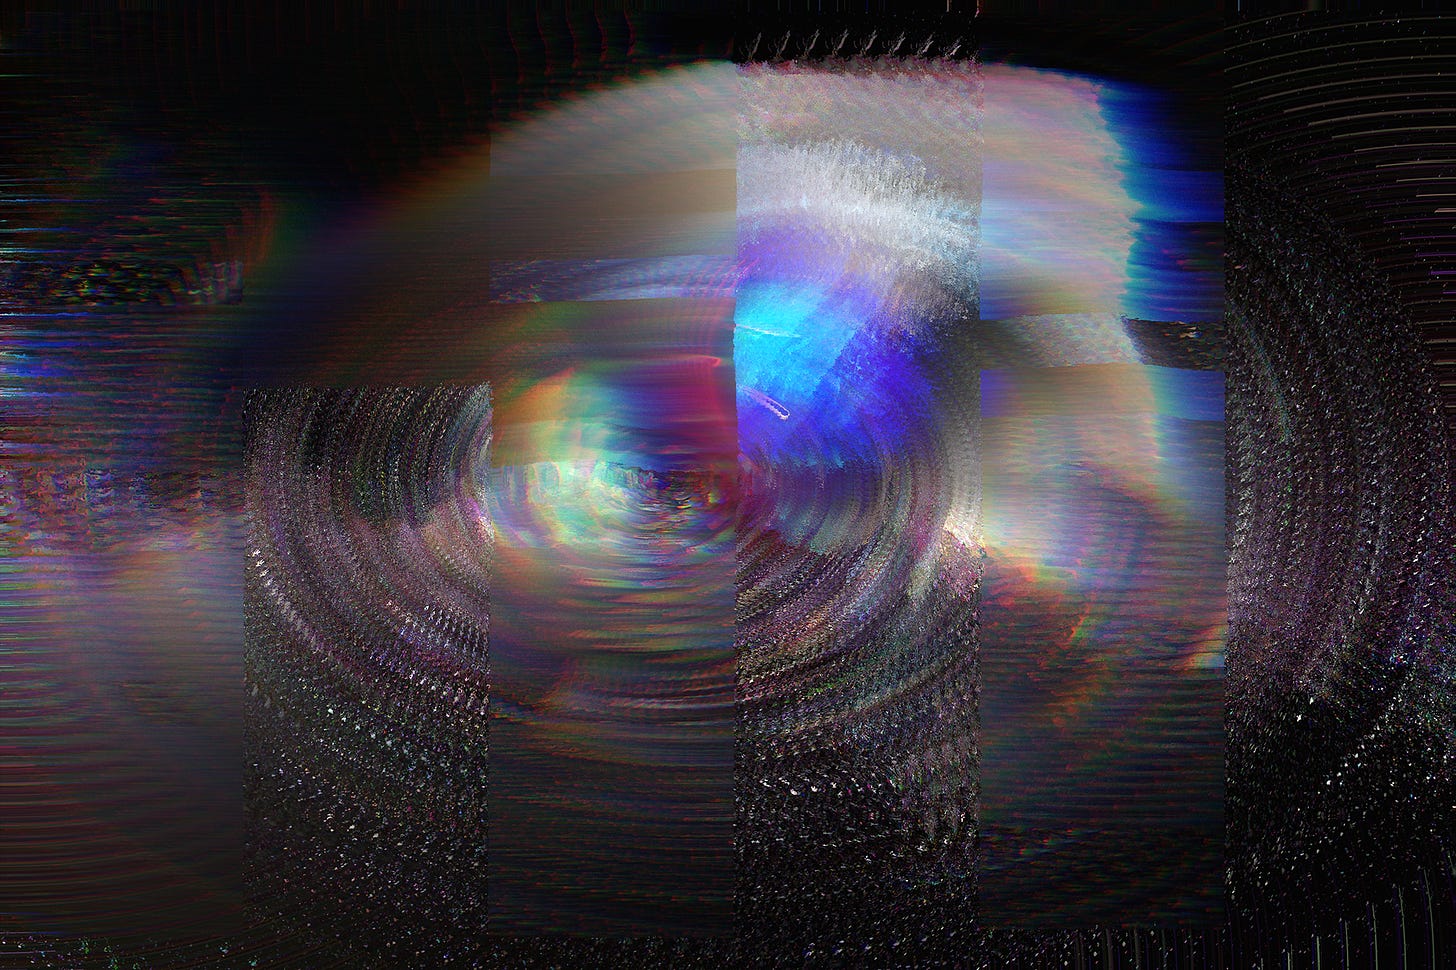 Abstract glitch art with spiral elements